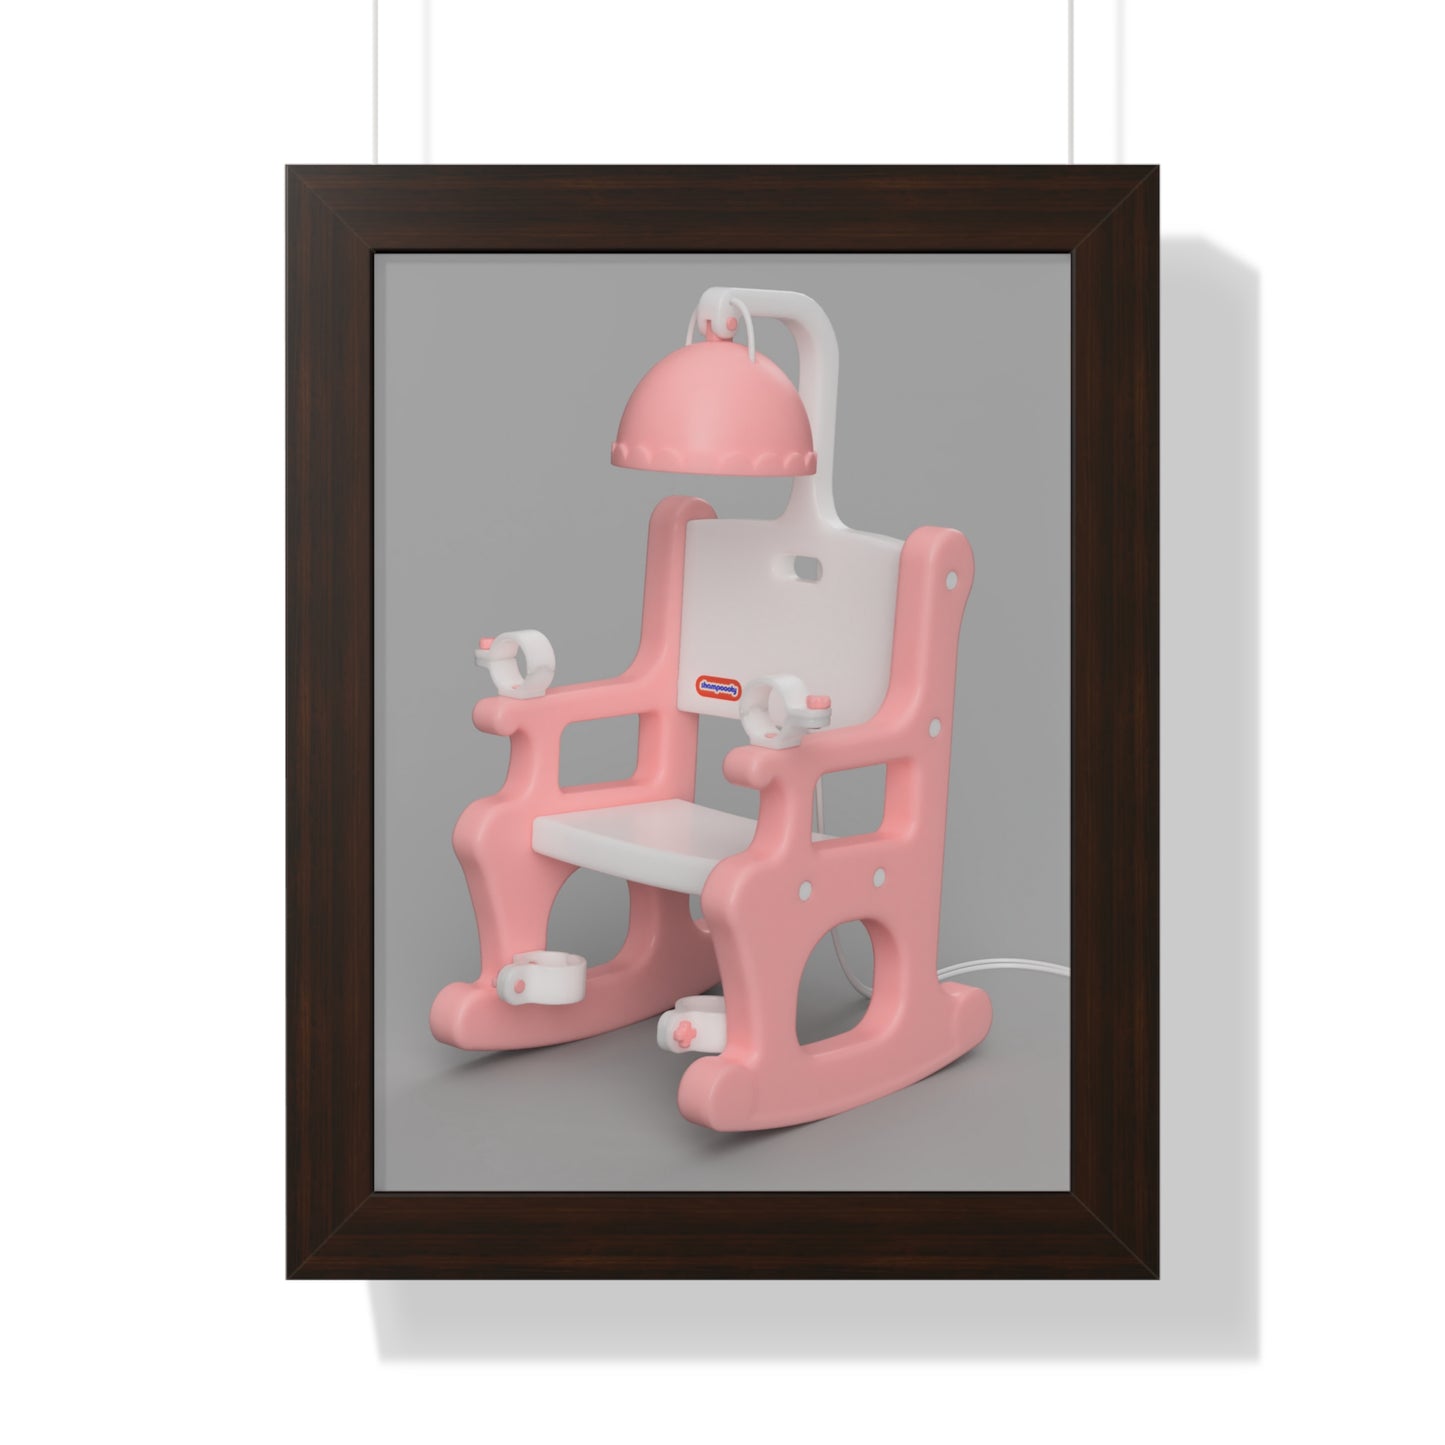 Electric Chair Print Framed (Rendered)